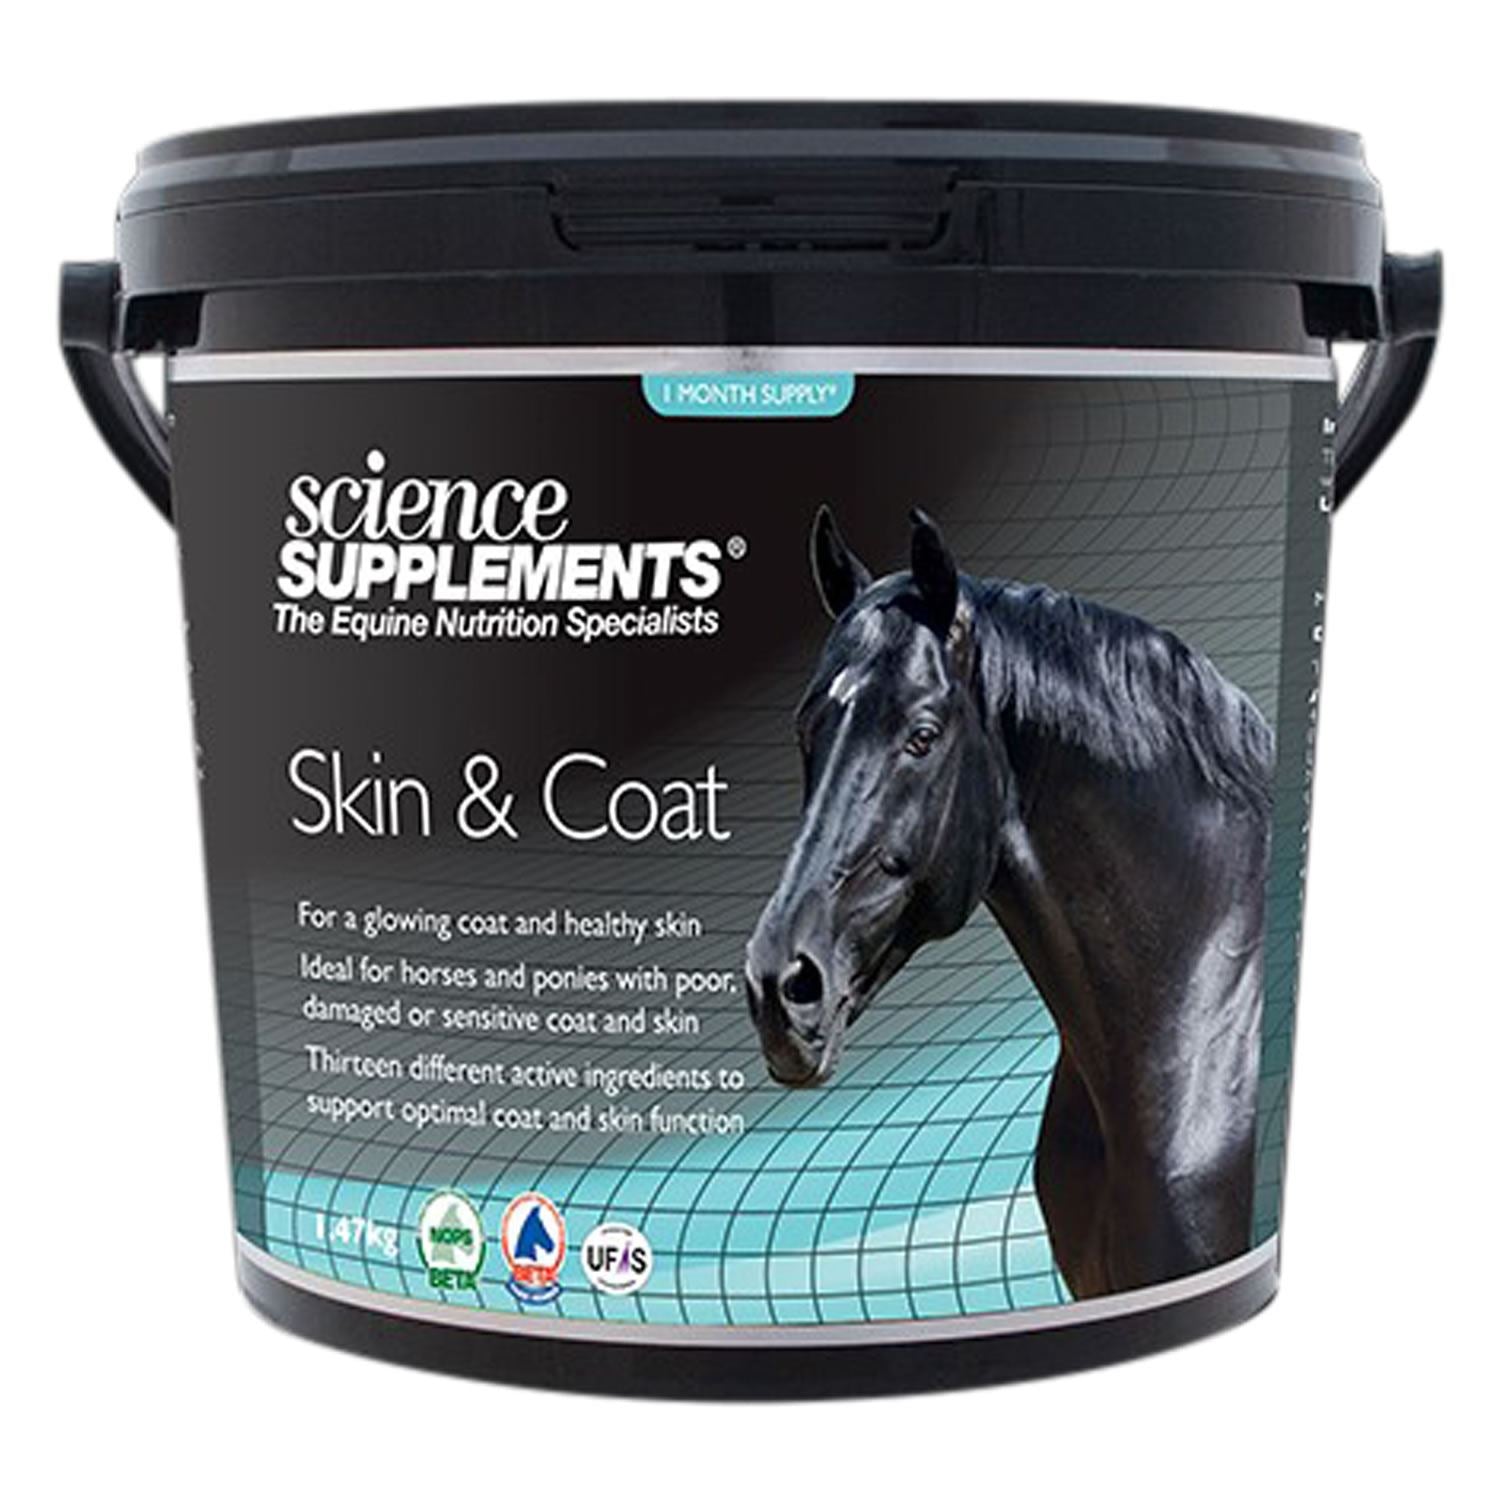 Science Supplements Skin & Coat - Just Horse Riders